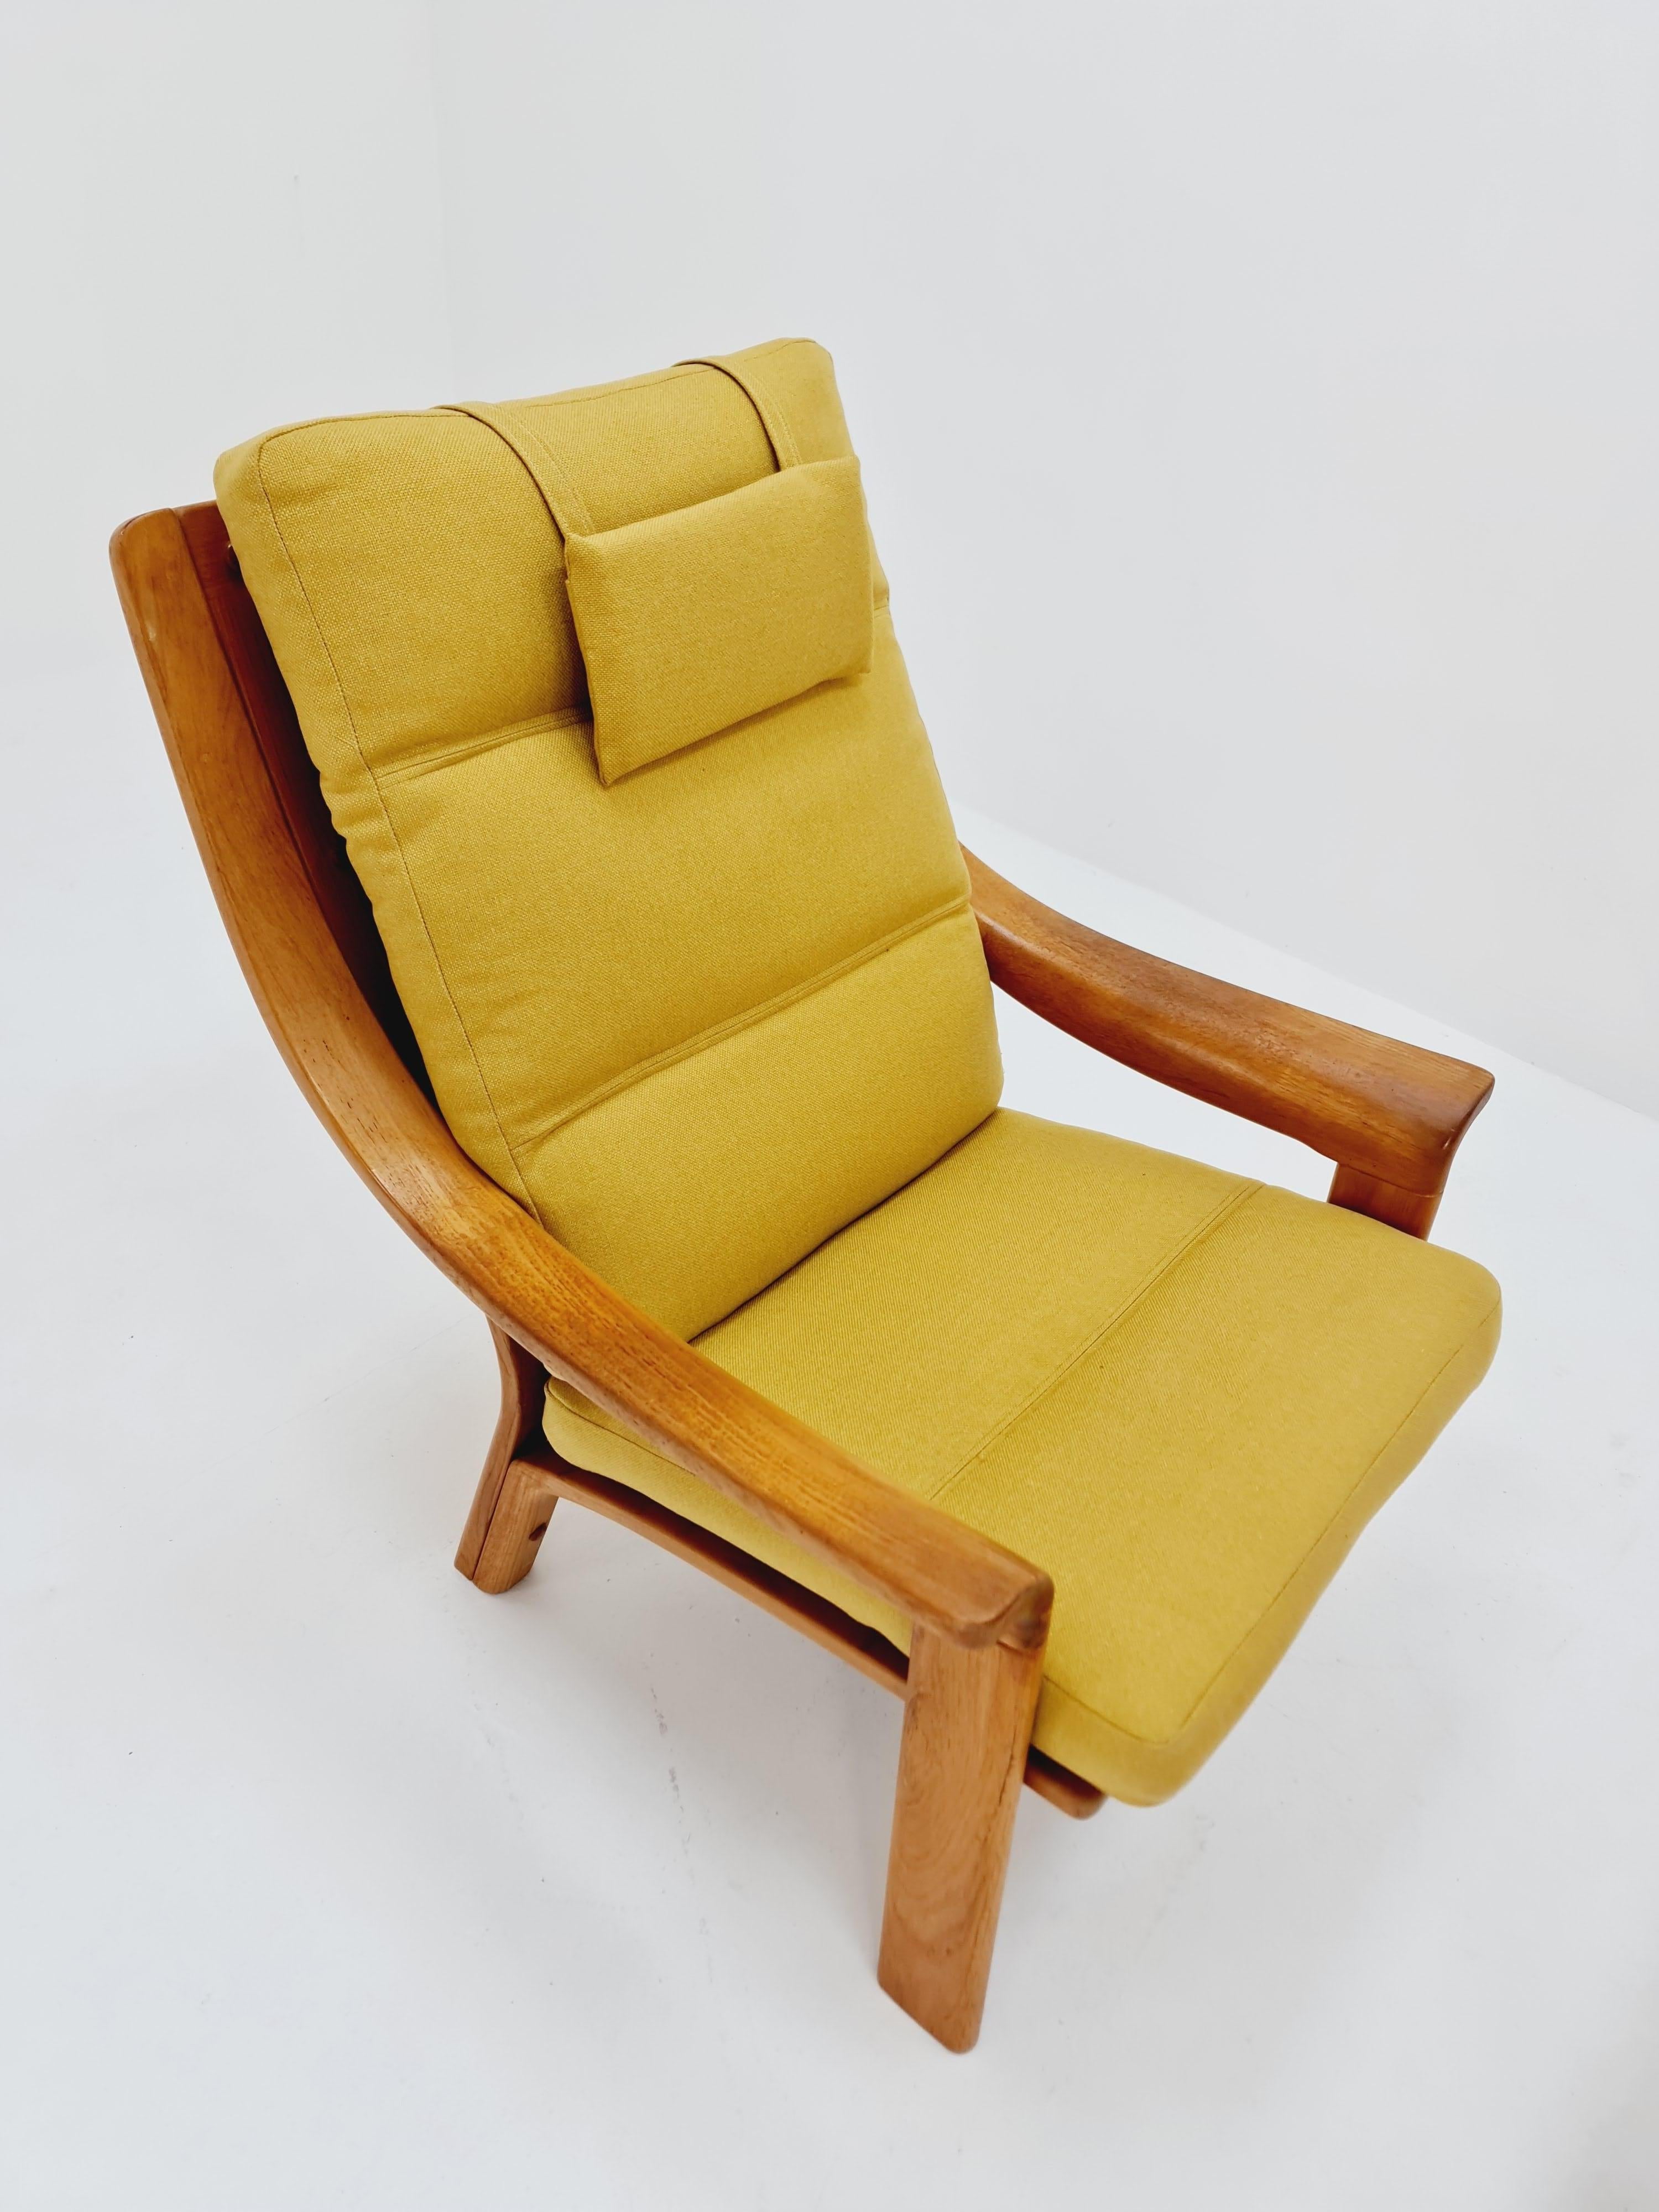 2 Mid century easy lounge chairs by P.Jeppesen in solid teak In Good Condition For Sale In Gaggenau, DE